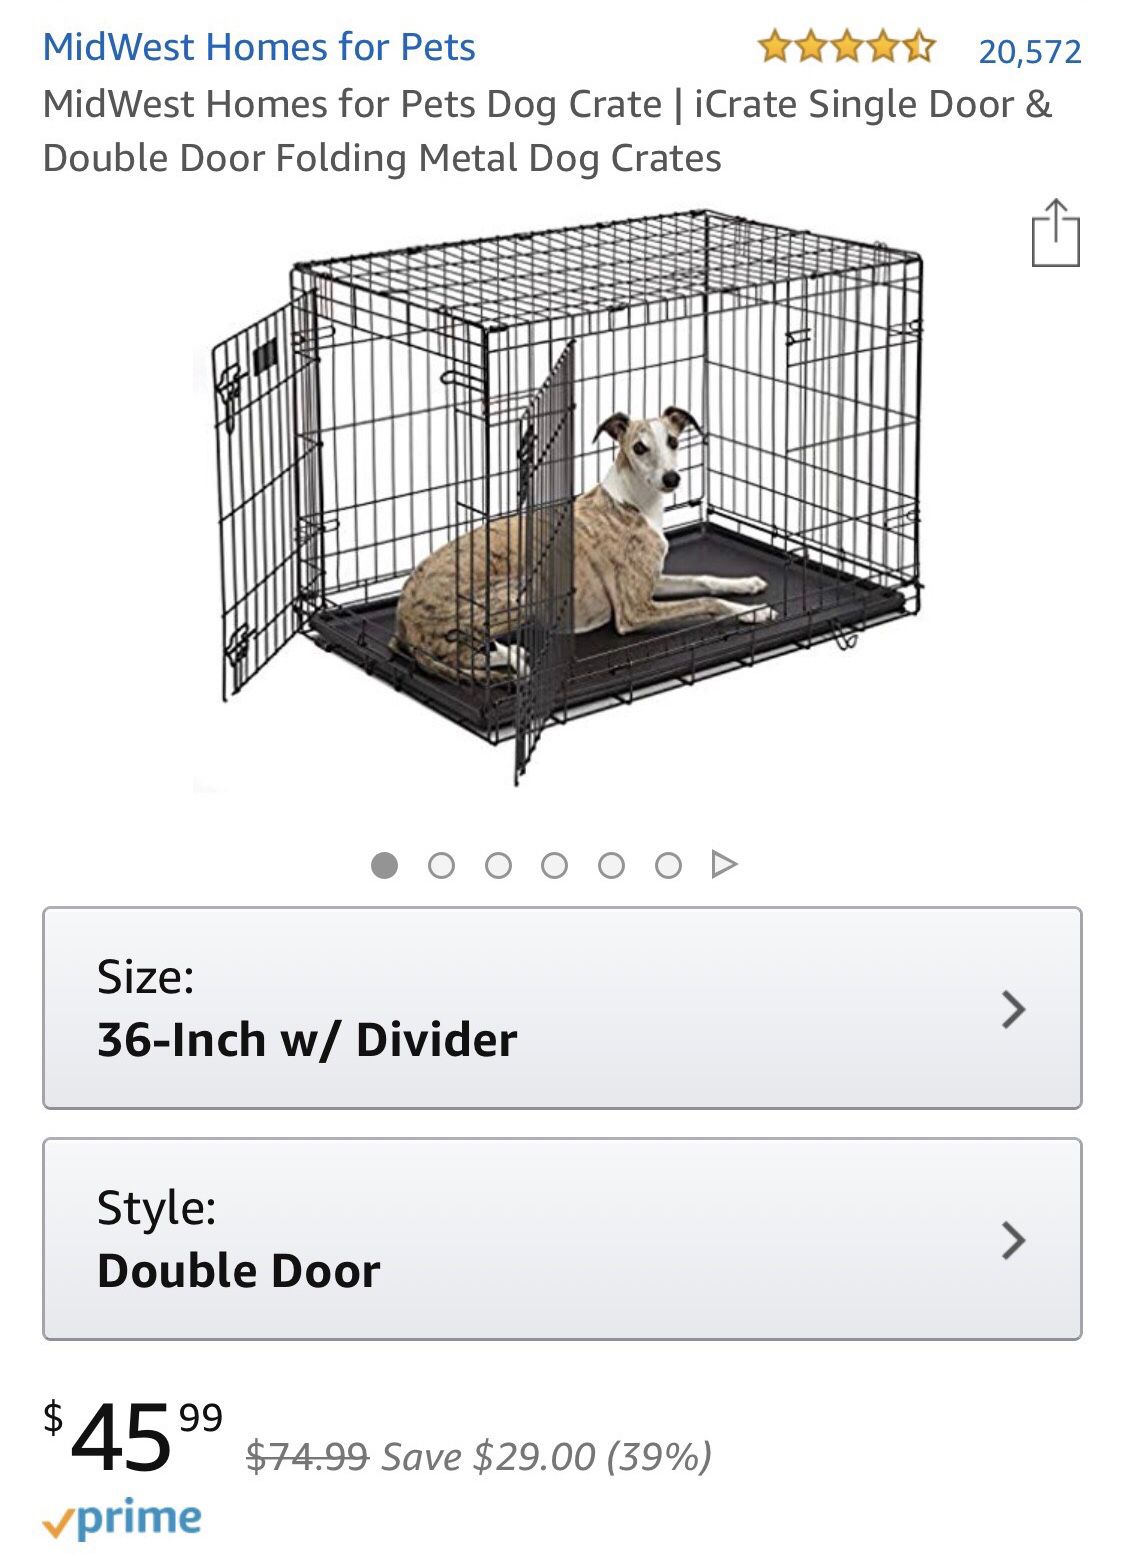 Dog Crate w/ Divider - 36 inch